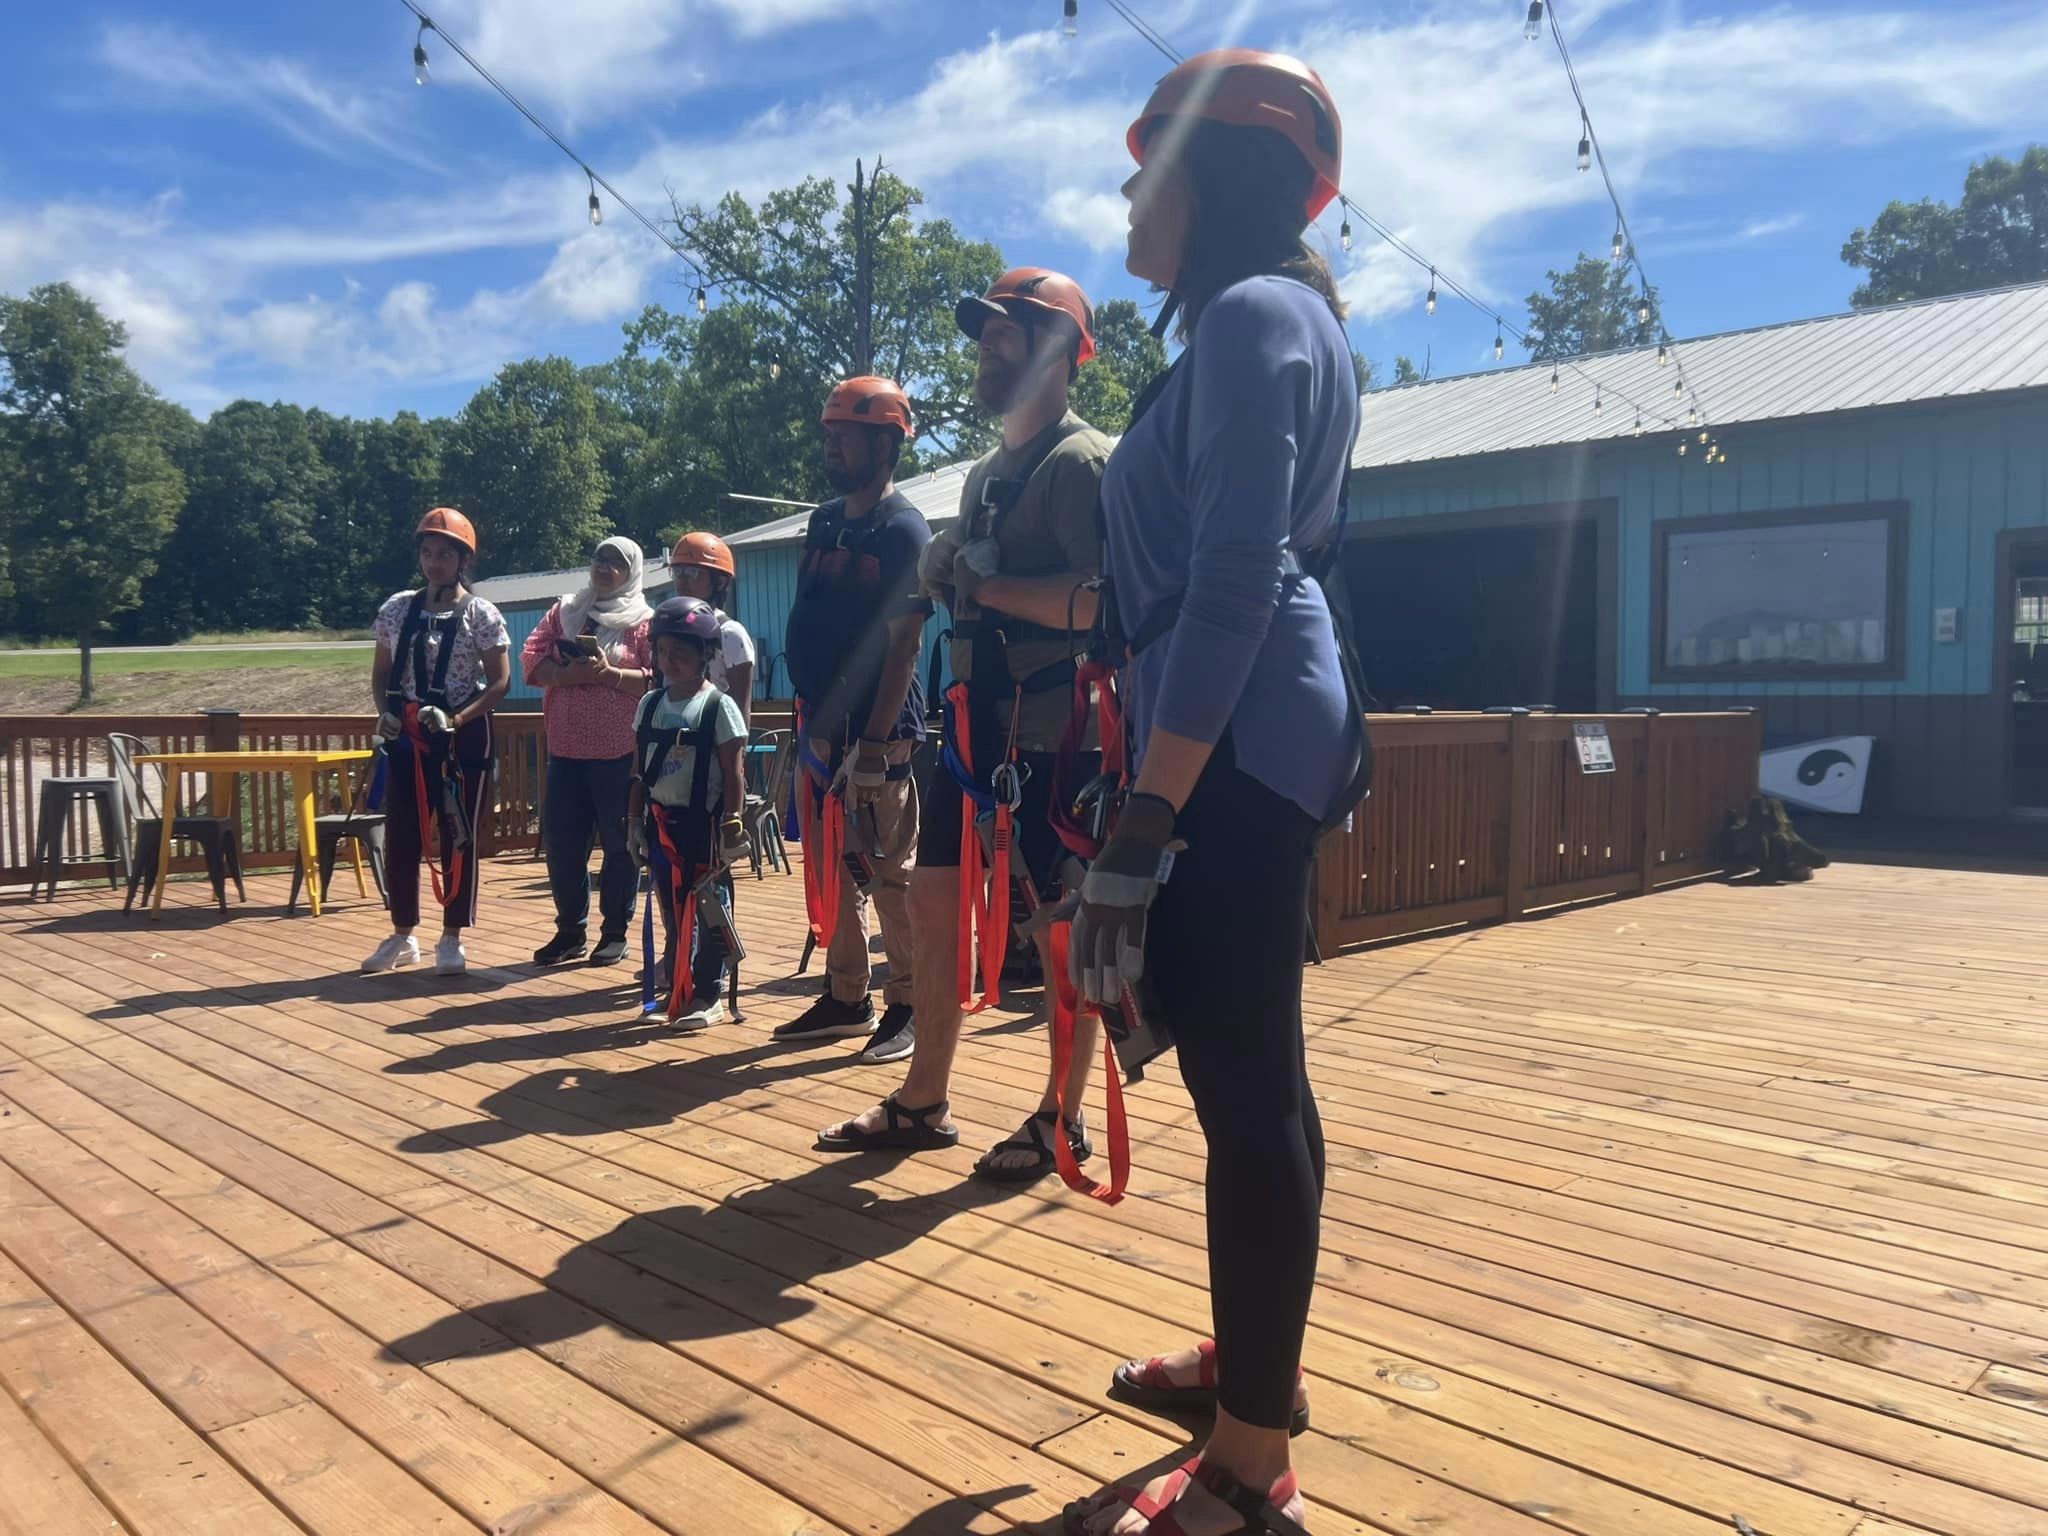 How to Soar Above it All with Eureka Springs Zipline